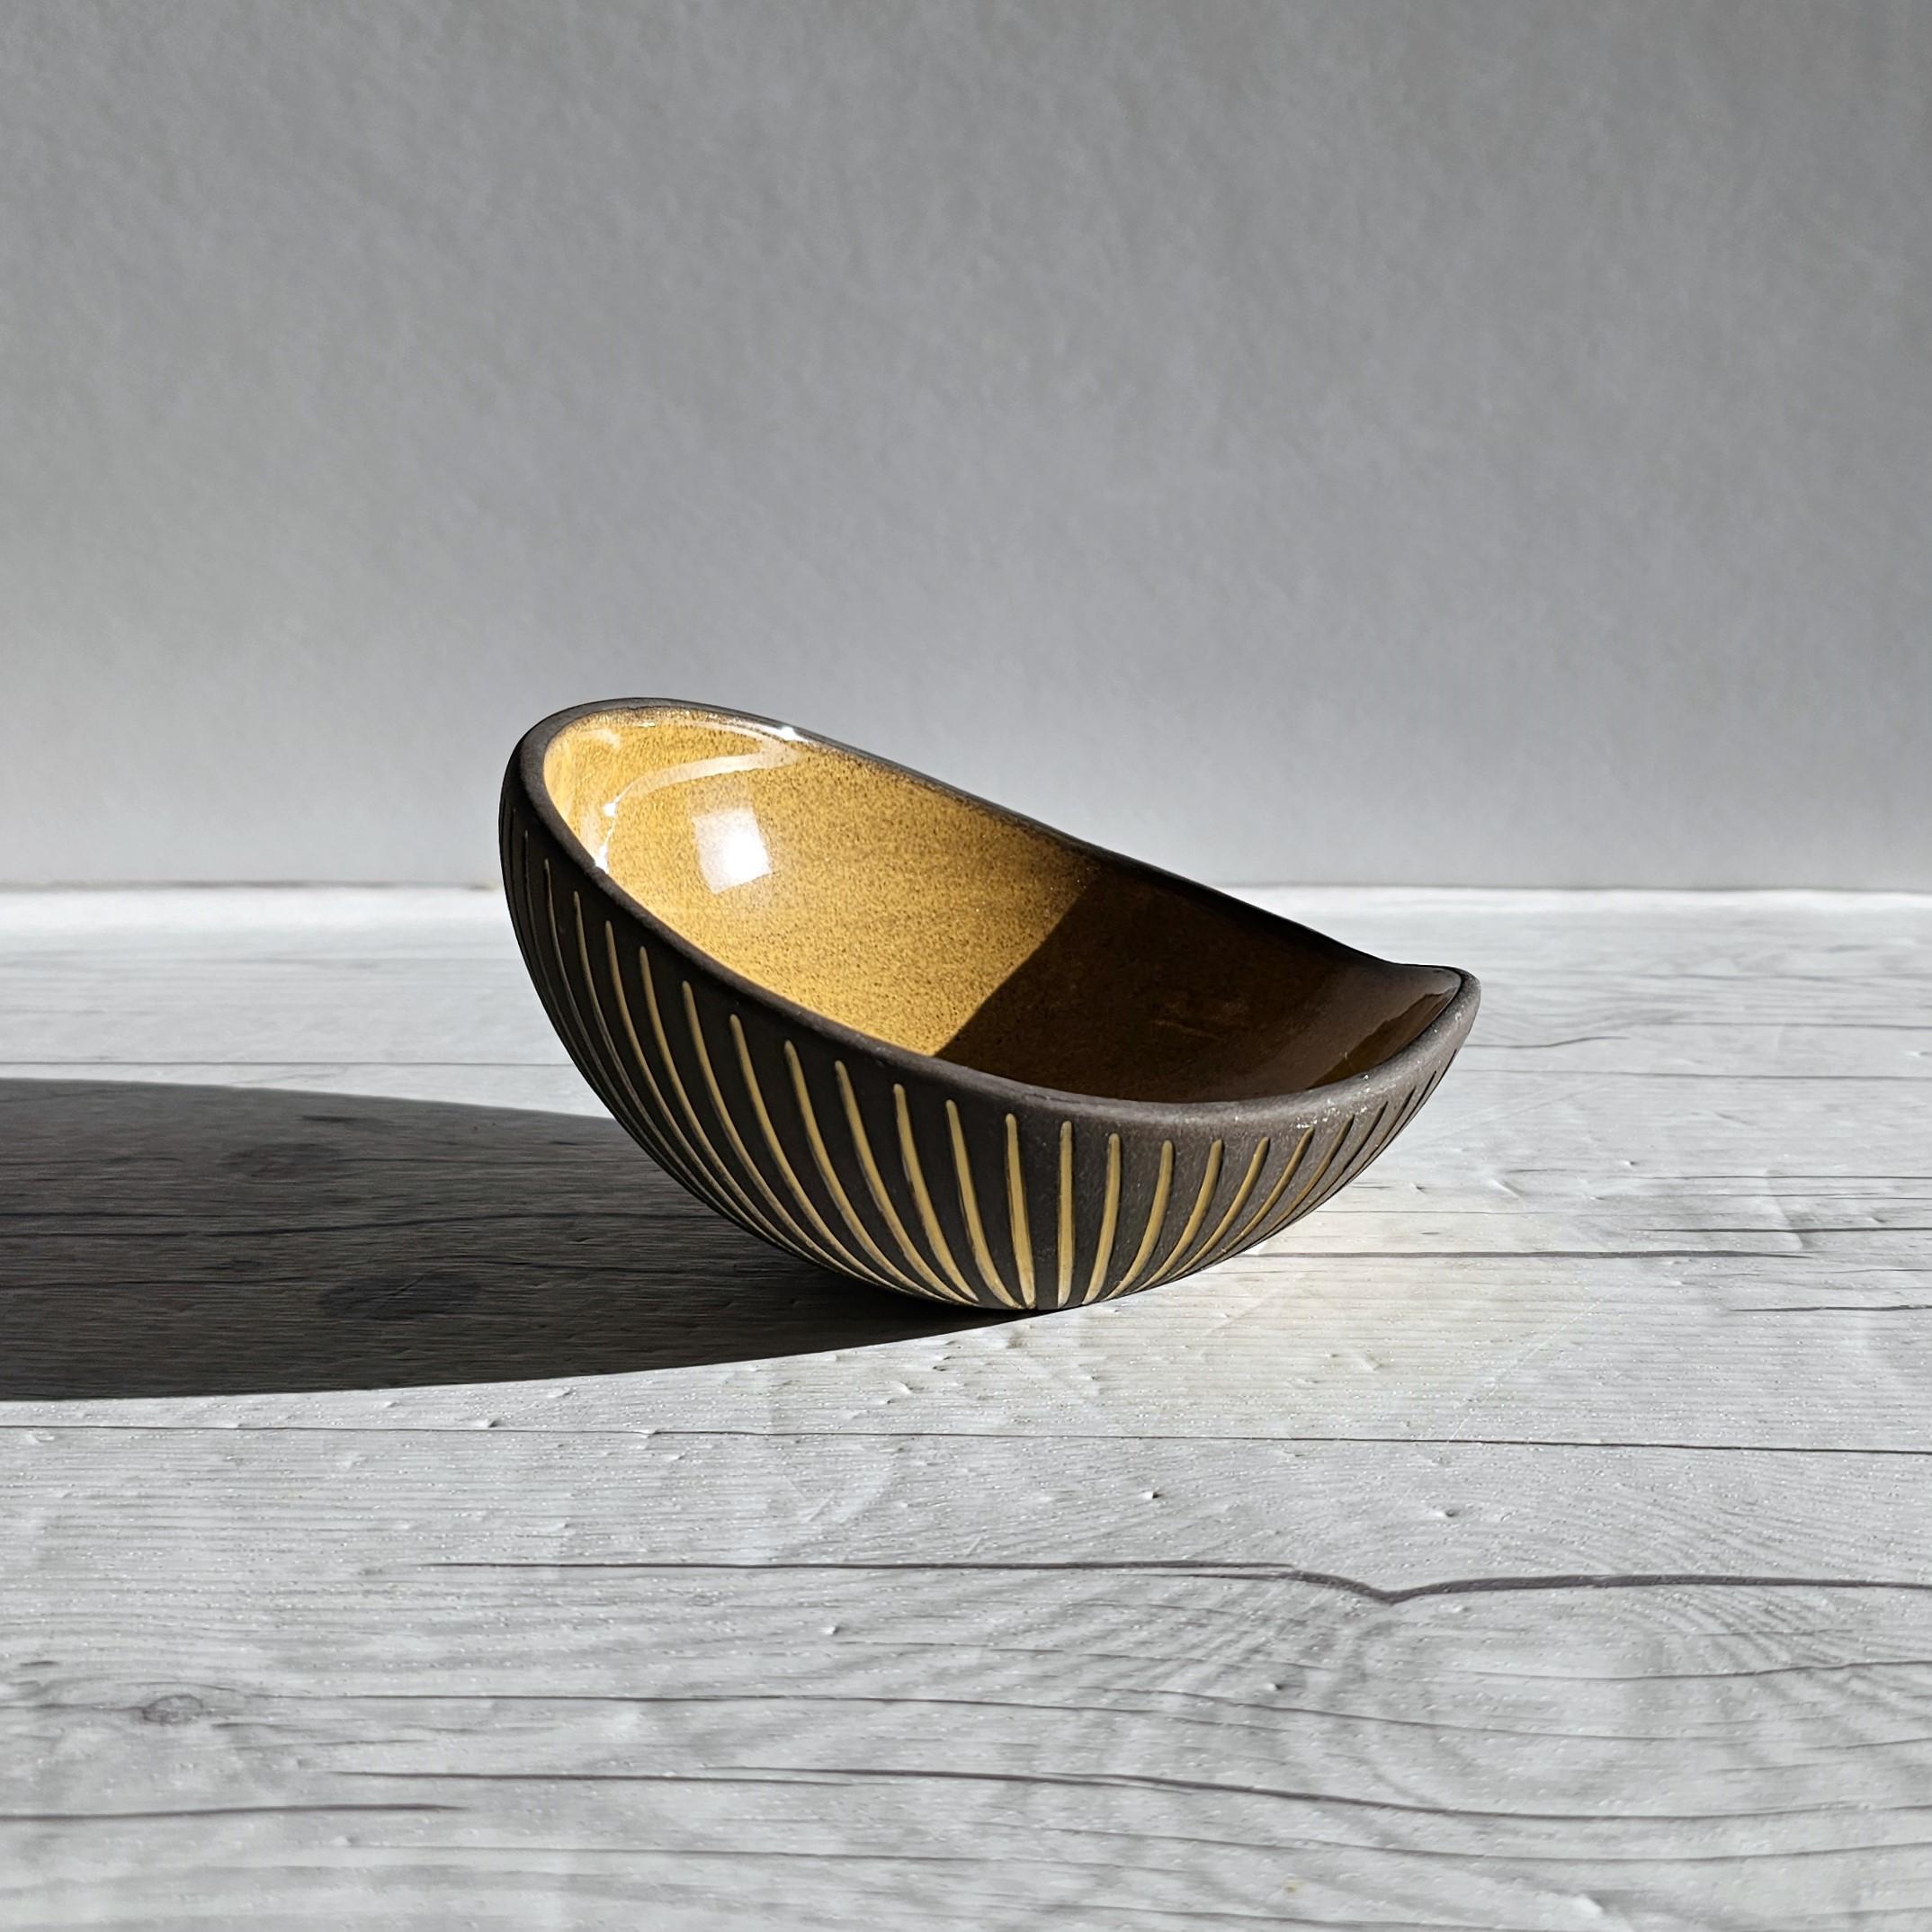 This elegant work of Swedish Mid Century Modern design is by Hjördis Oldfors (b. 1920 - d. 2014) for Upsala Ekeby. Oldfors was a celebrated Swedish ceramicist, painting, and textile artist, known for many series she designed at Upsala Ekeby which